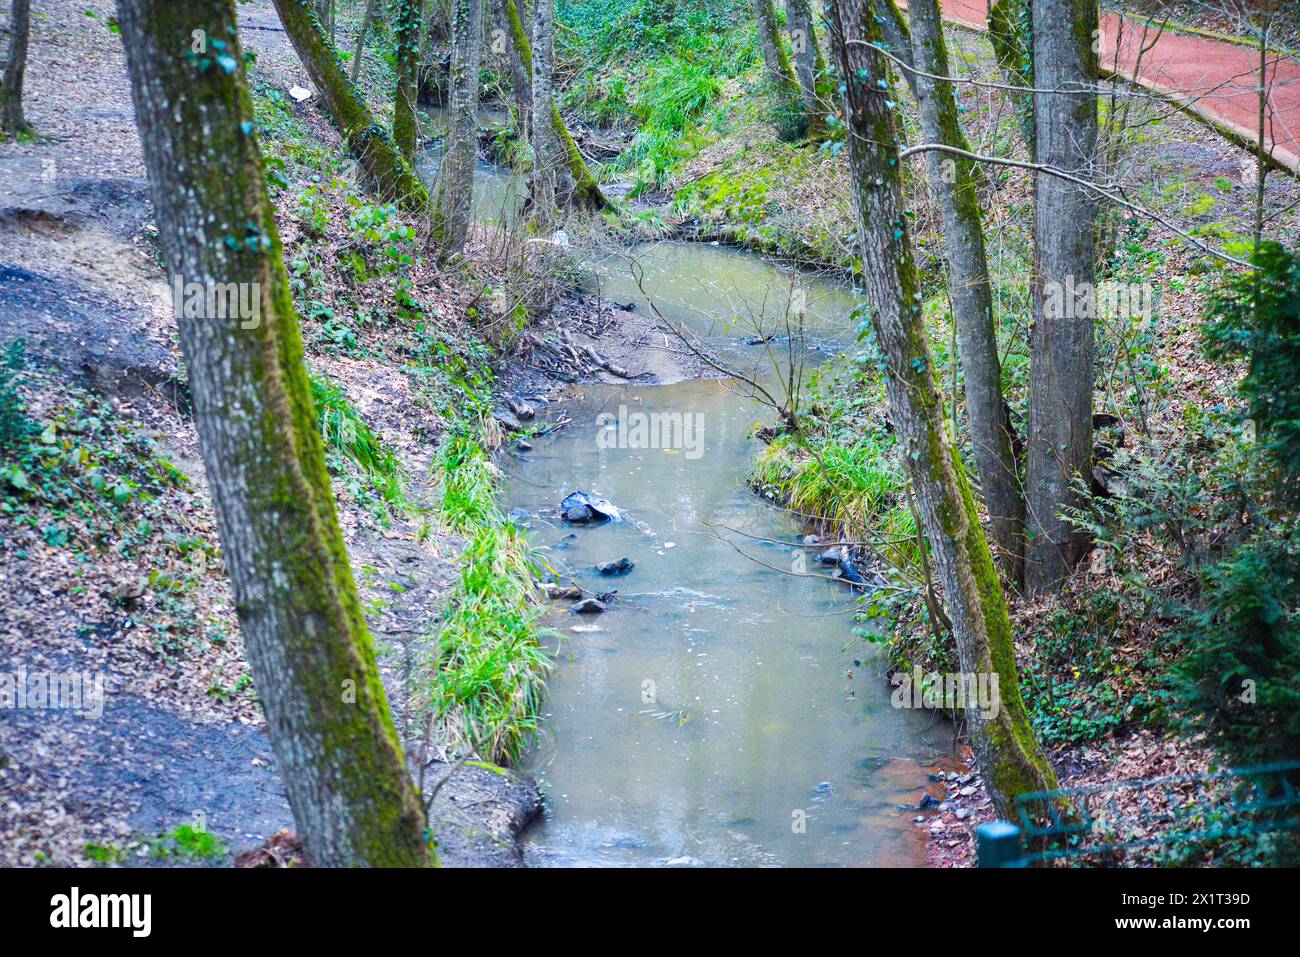 A tranquil stream meandering through the lush forest, surrounded by tall trees and vibrant green foliage. Stock Photo